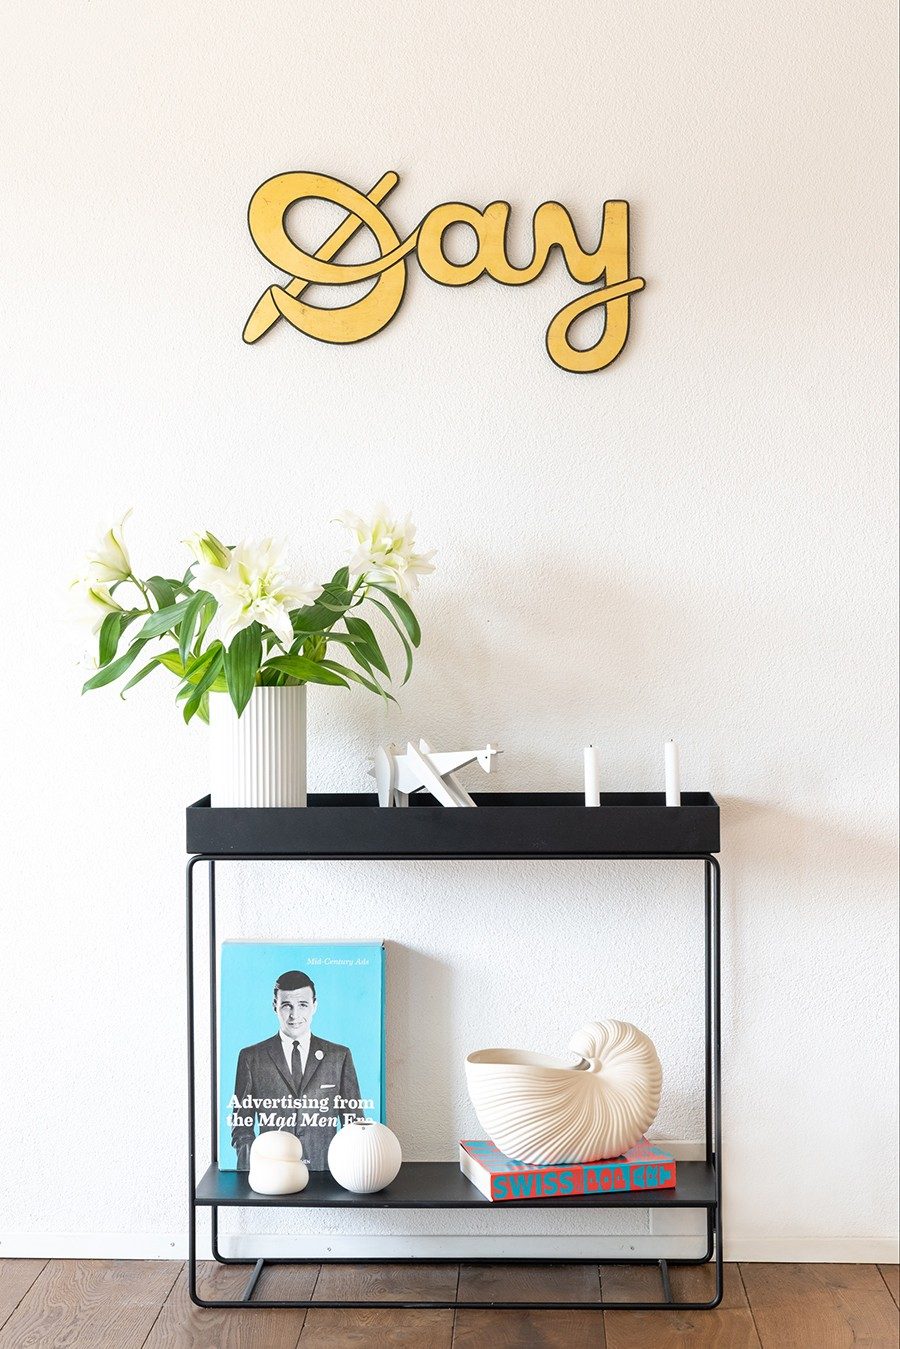 The "Day" lettering hangs above a simple sideboard.